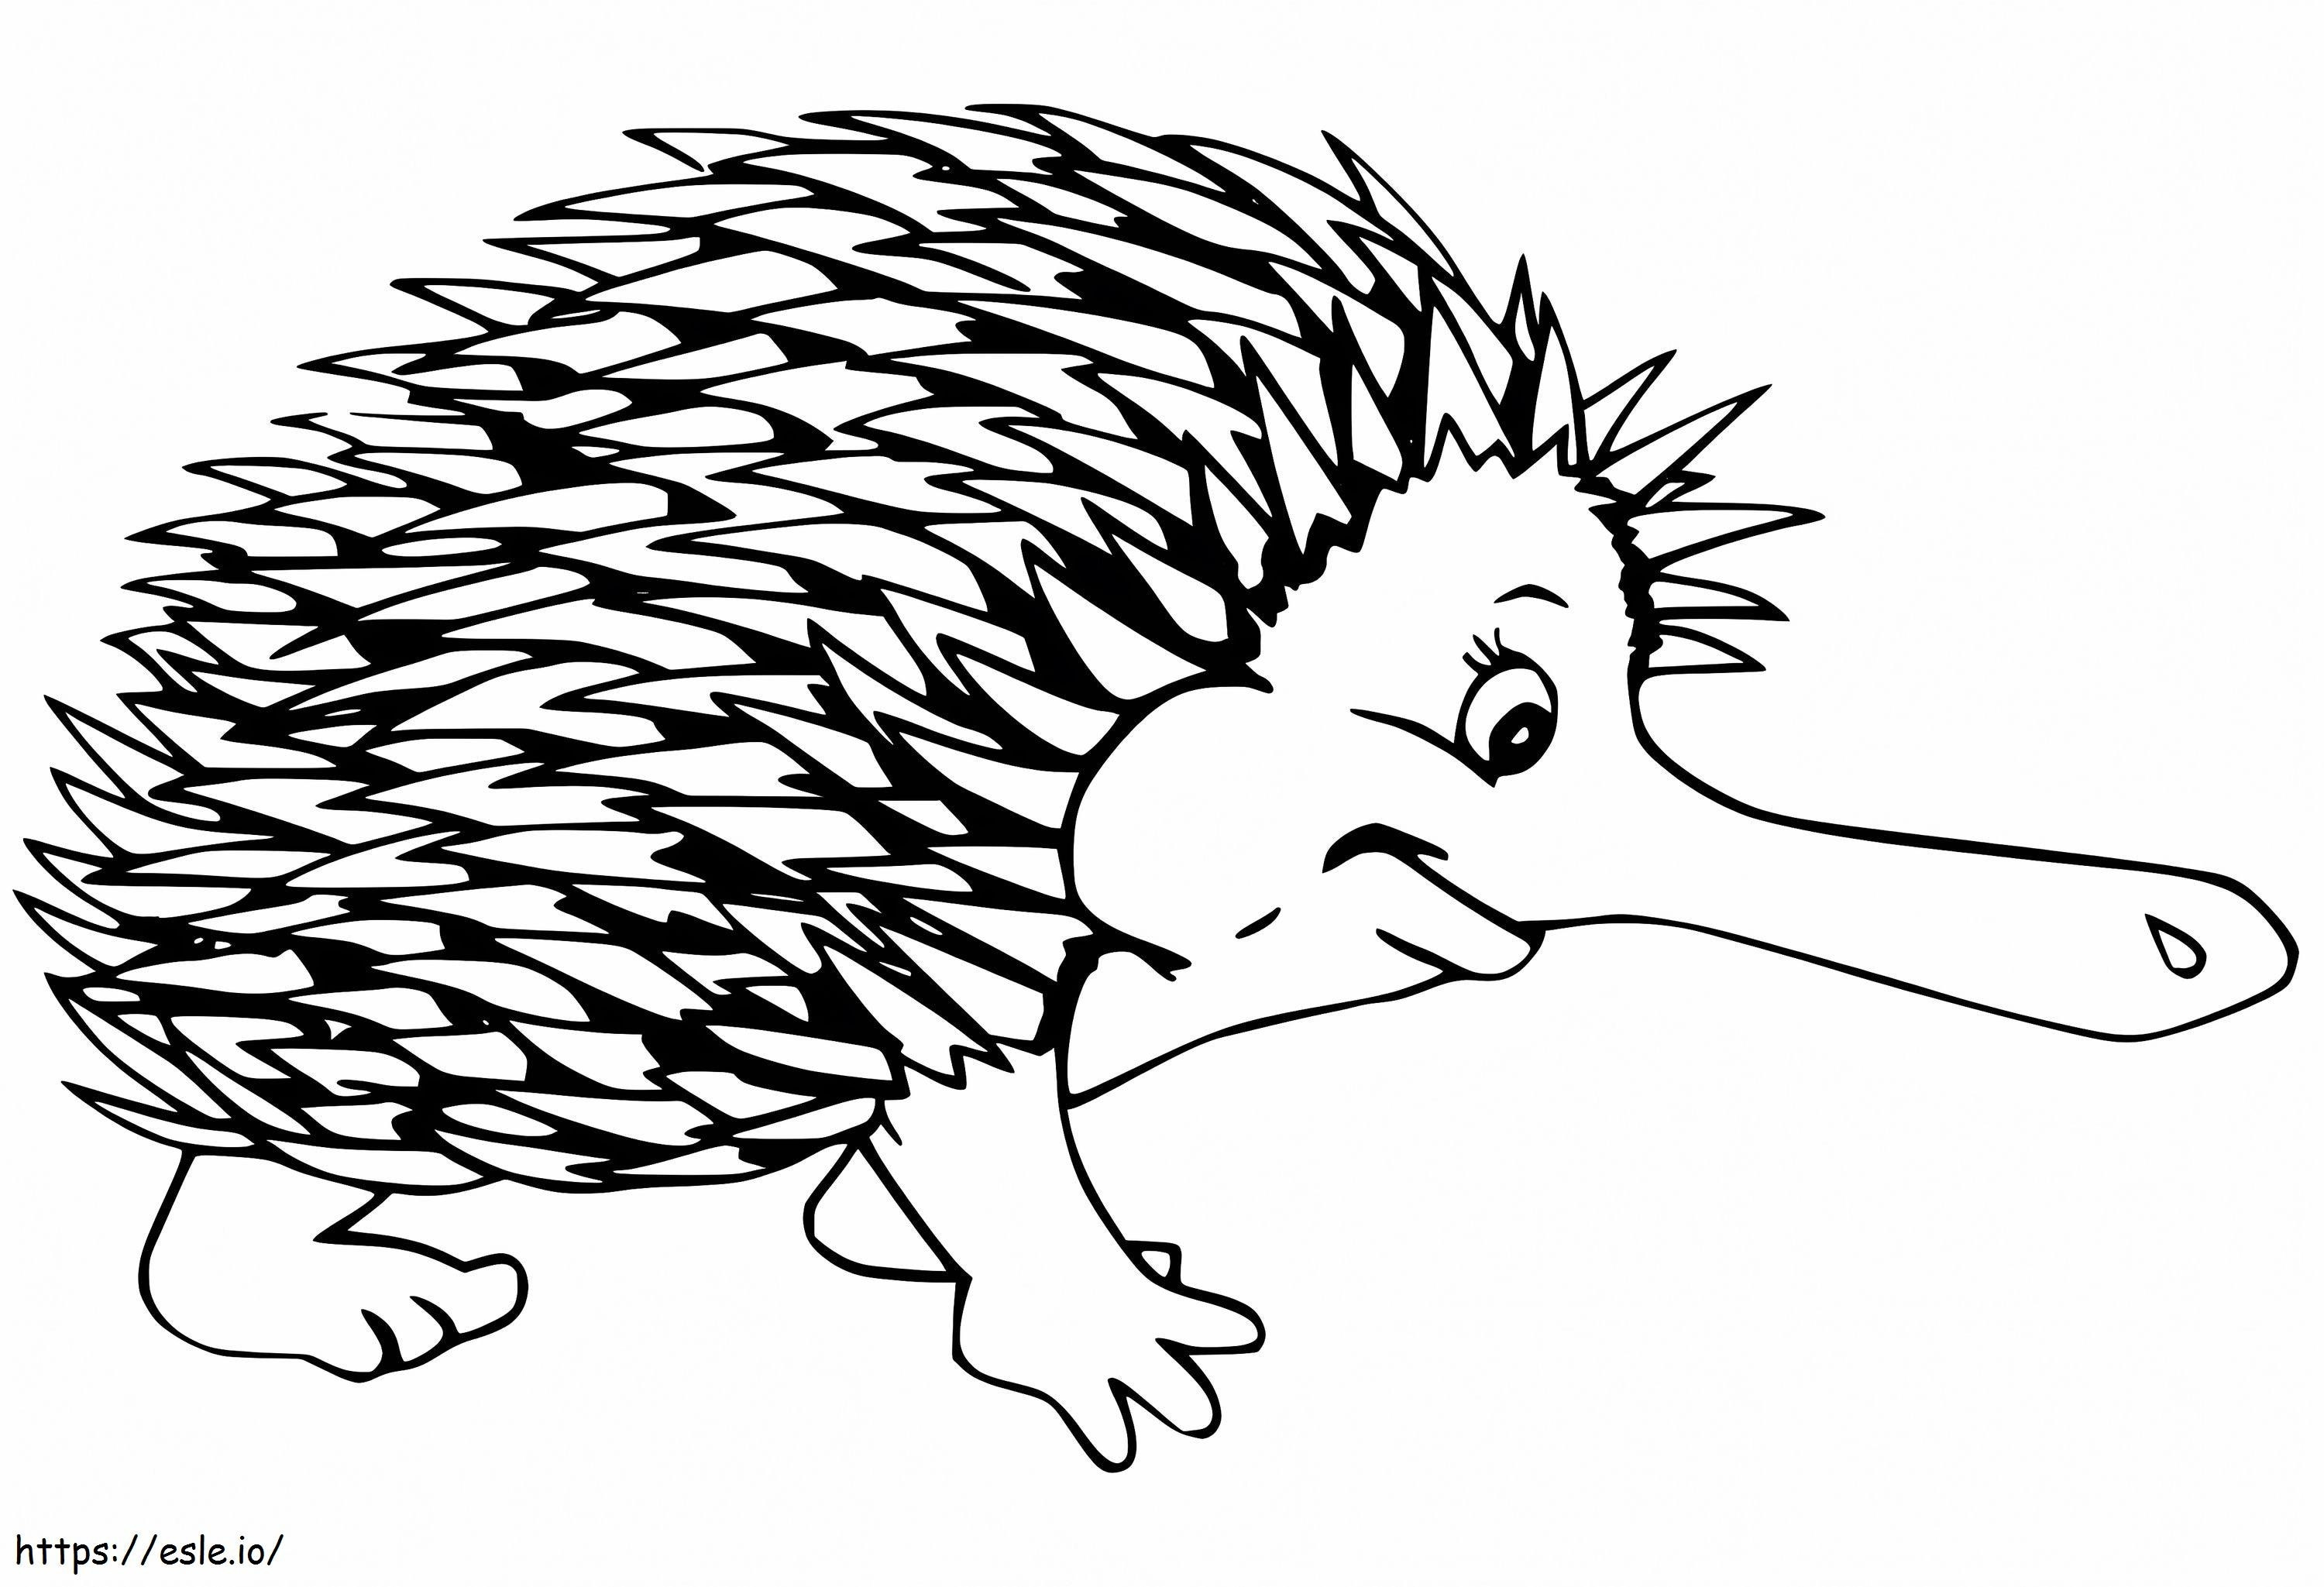 Echidna Smiling coloring page